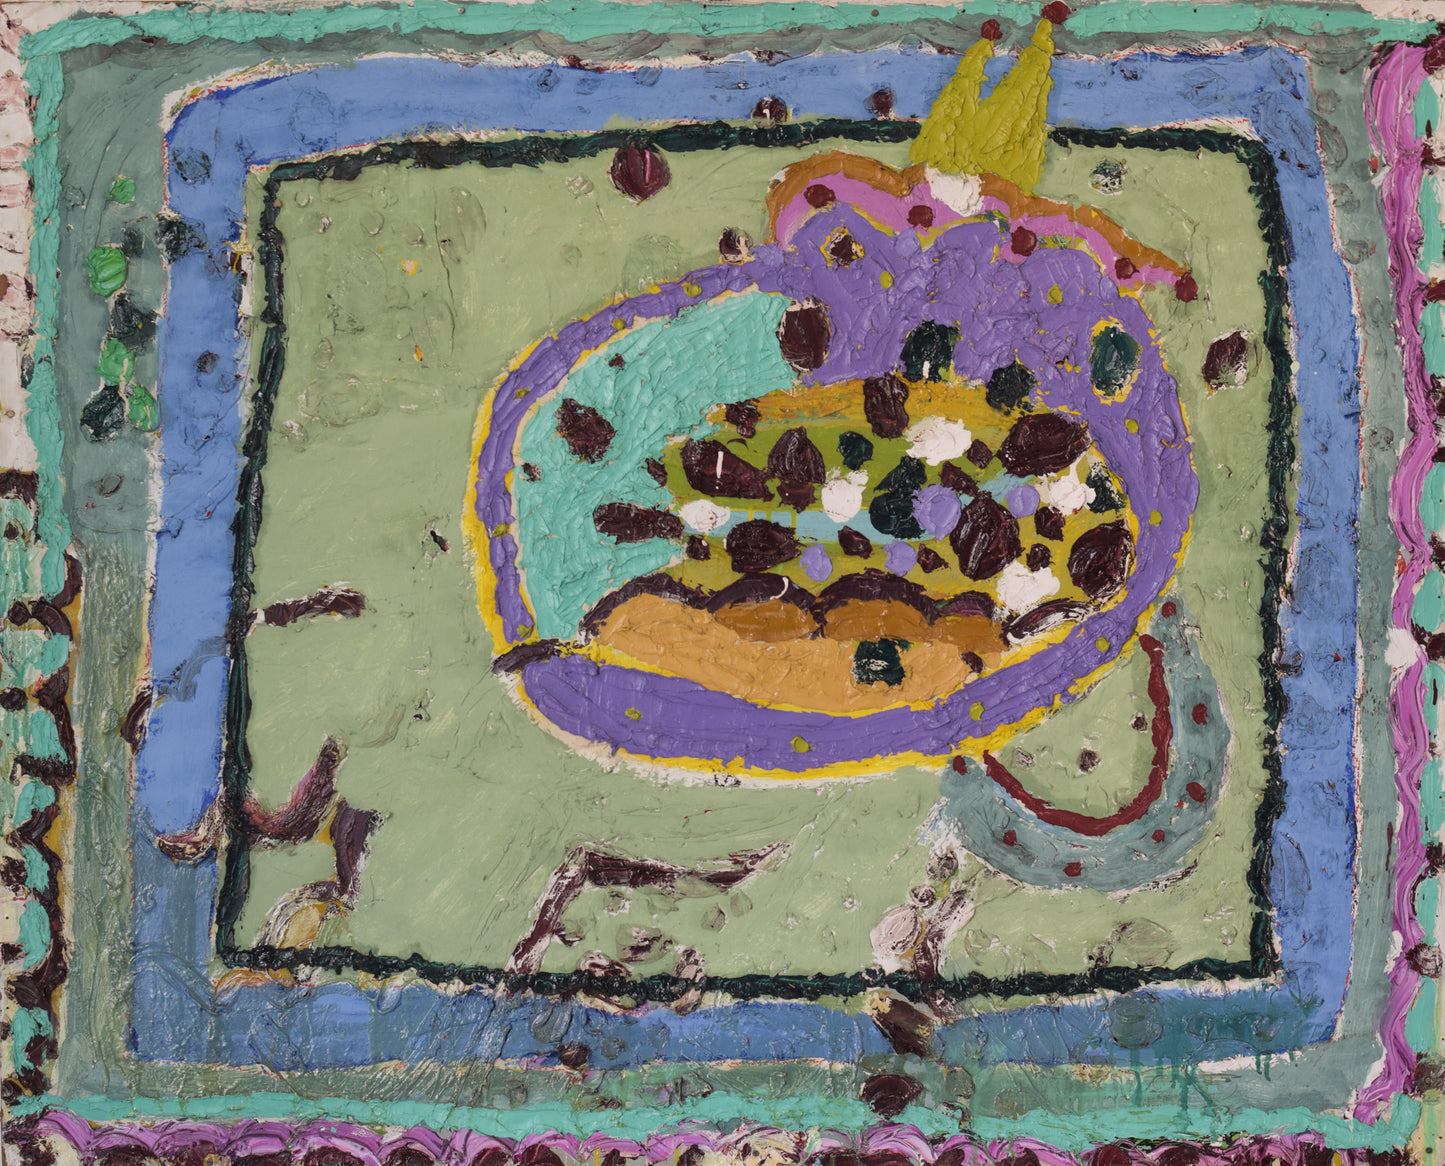 Follower of Gillian Ayres - Abstract Painting in a Modernist Style